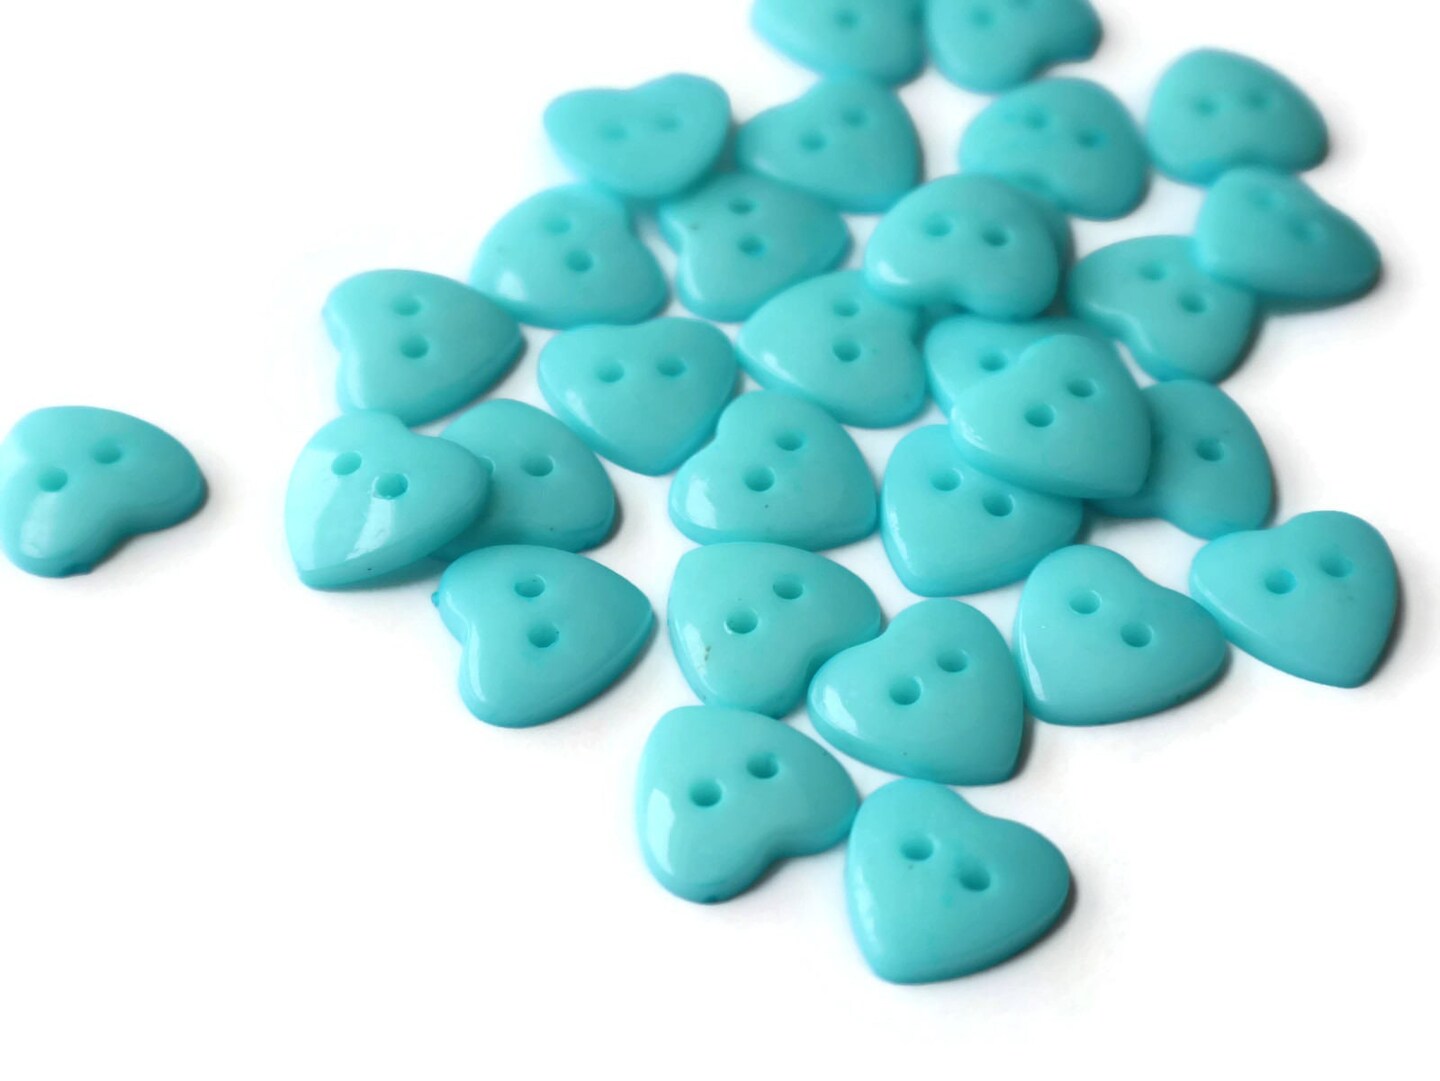 30 14mm Blue Heart Buttons Two Hole Plastic Buttons